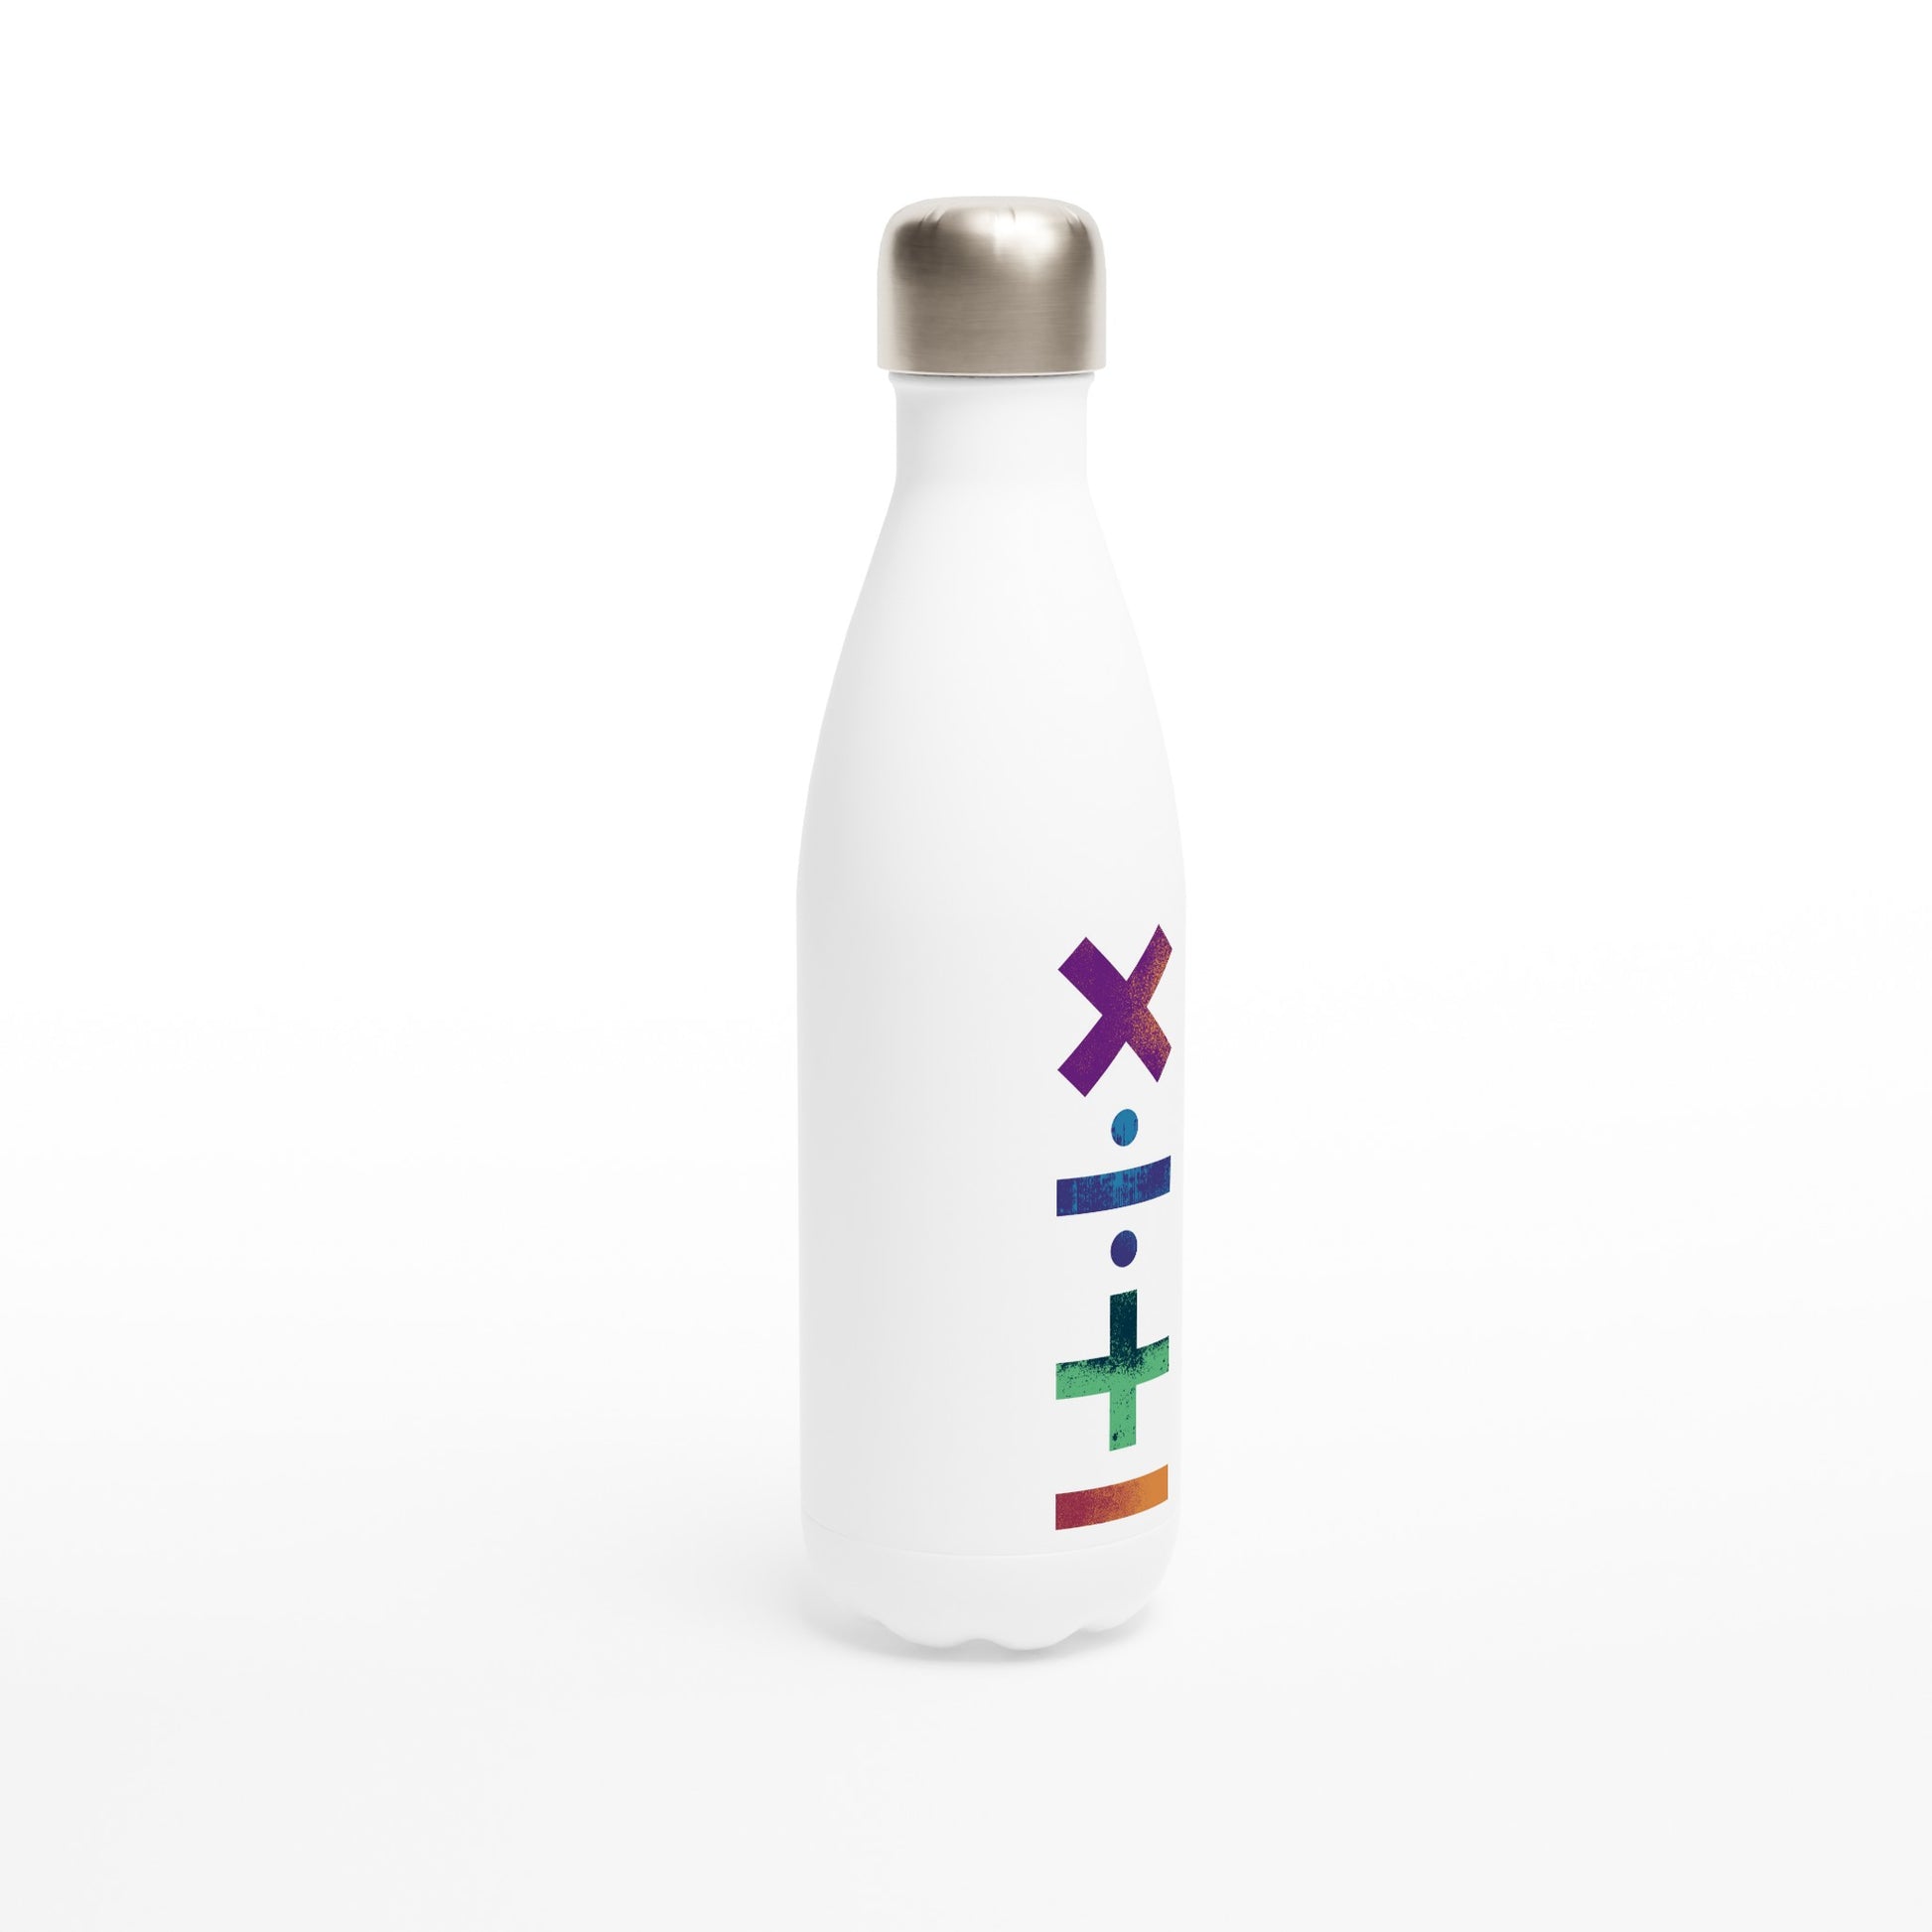 Maths Symbols - White 17oz Stainless Steel Water Bottle White Water Bottle Maths Science